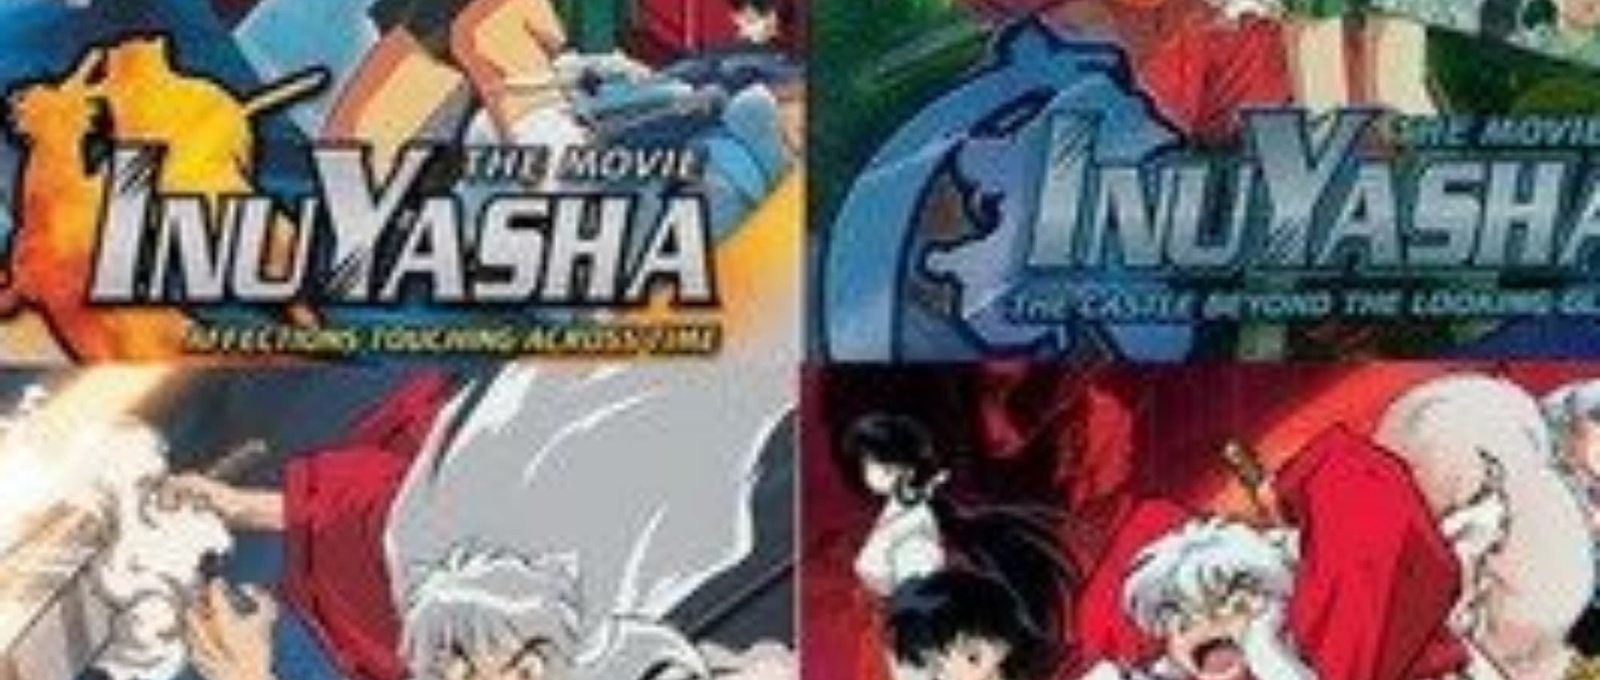 Poster for the movie "InuYasha: The Movie Disc 1"